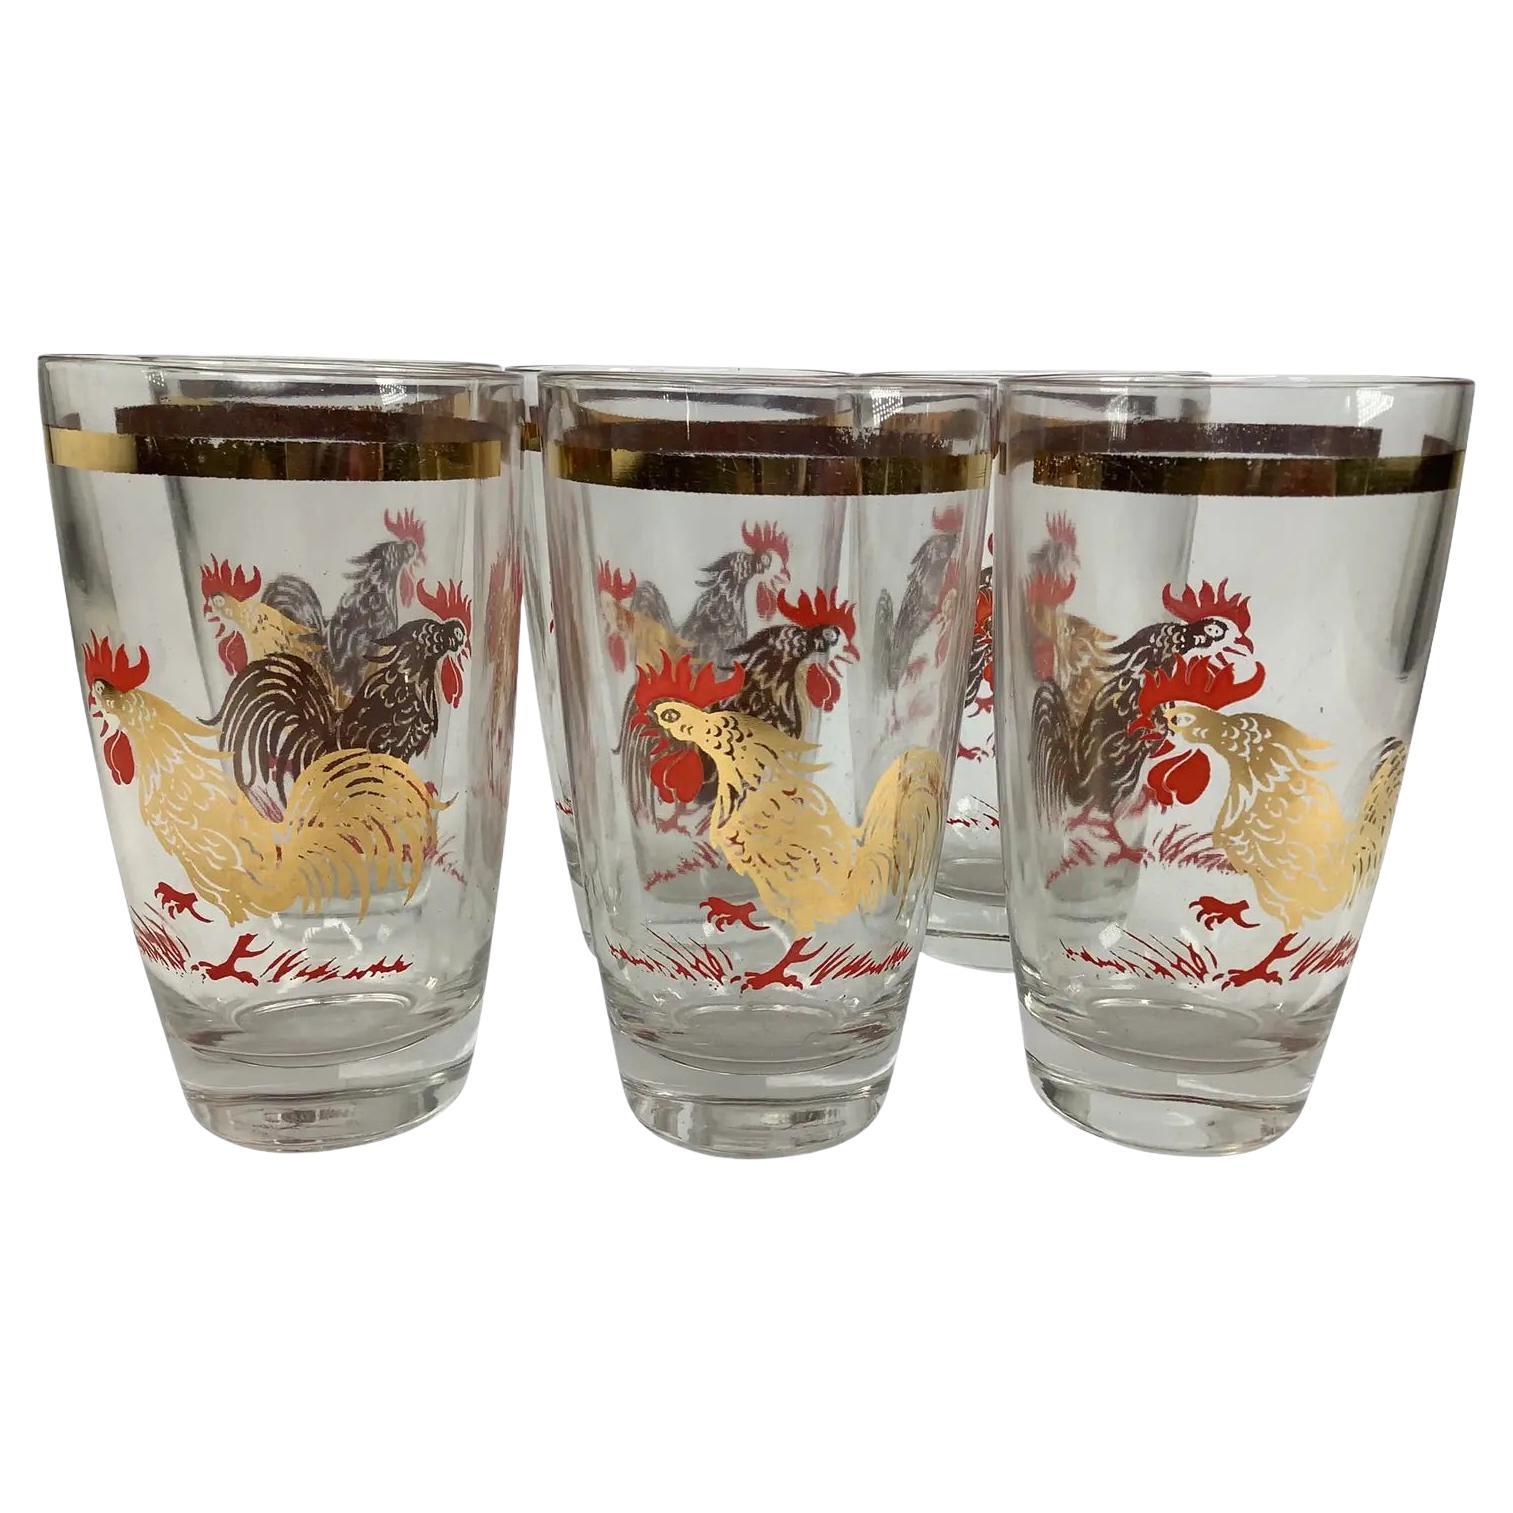 Set of 6 Vintage Highball Glasses With Rooster Decoration